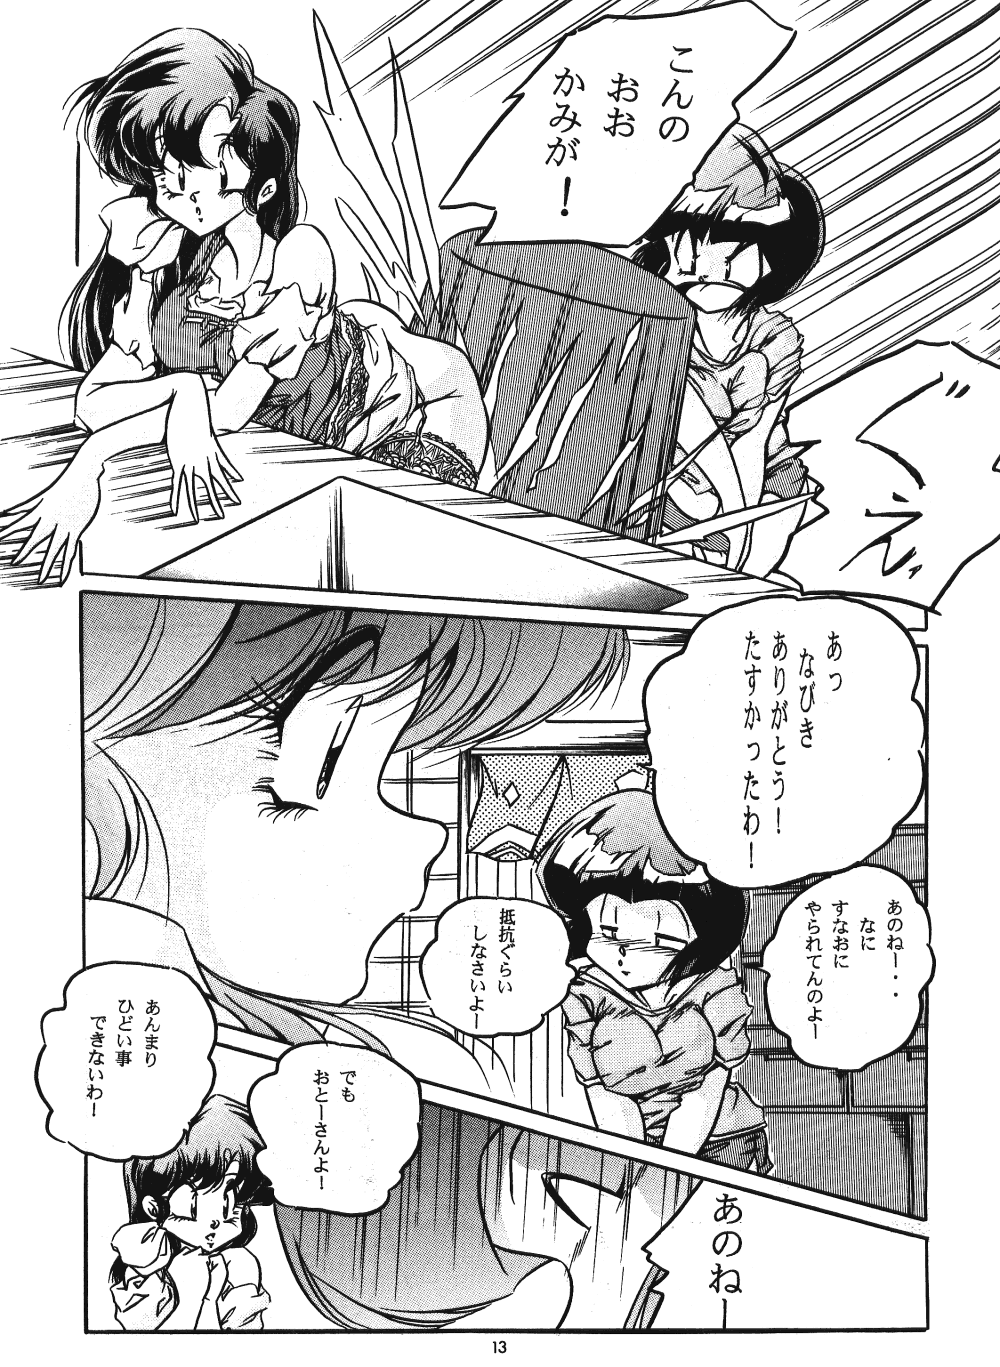 [C-COMPANY] C-COMPANY SPECIAL STAGE 18 (Ranma 1/2, Idol Project) page 14 full